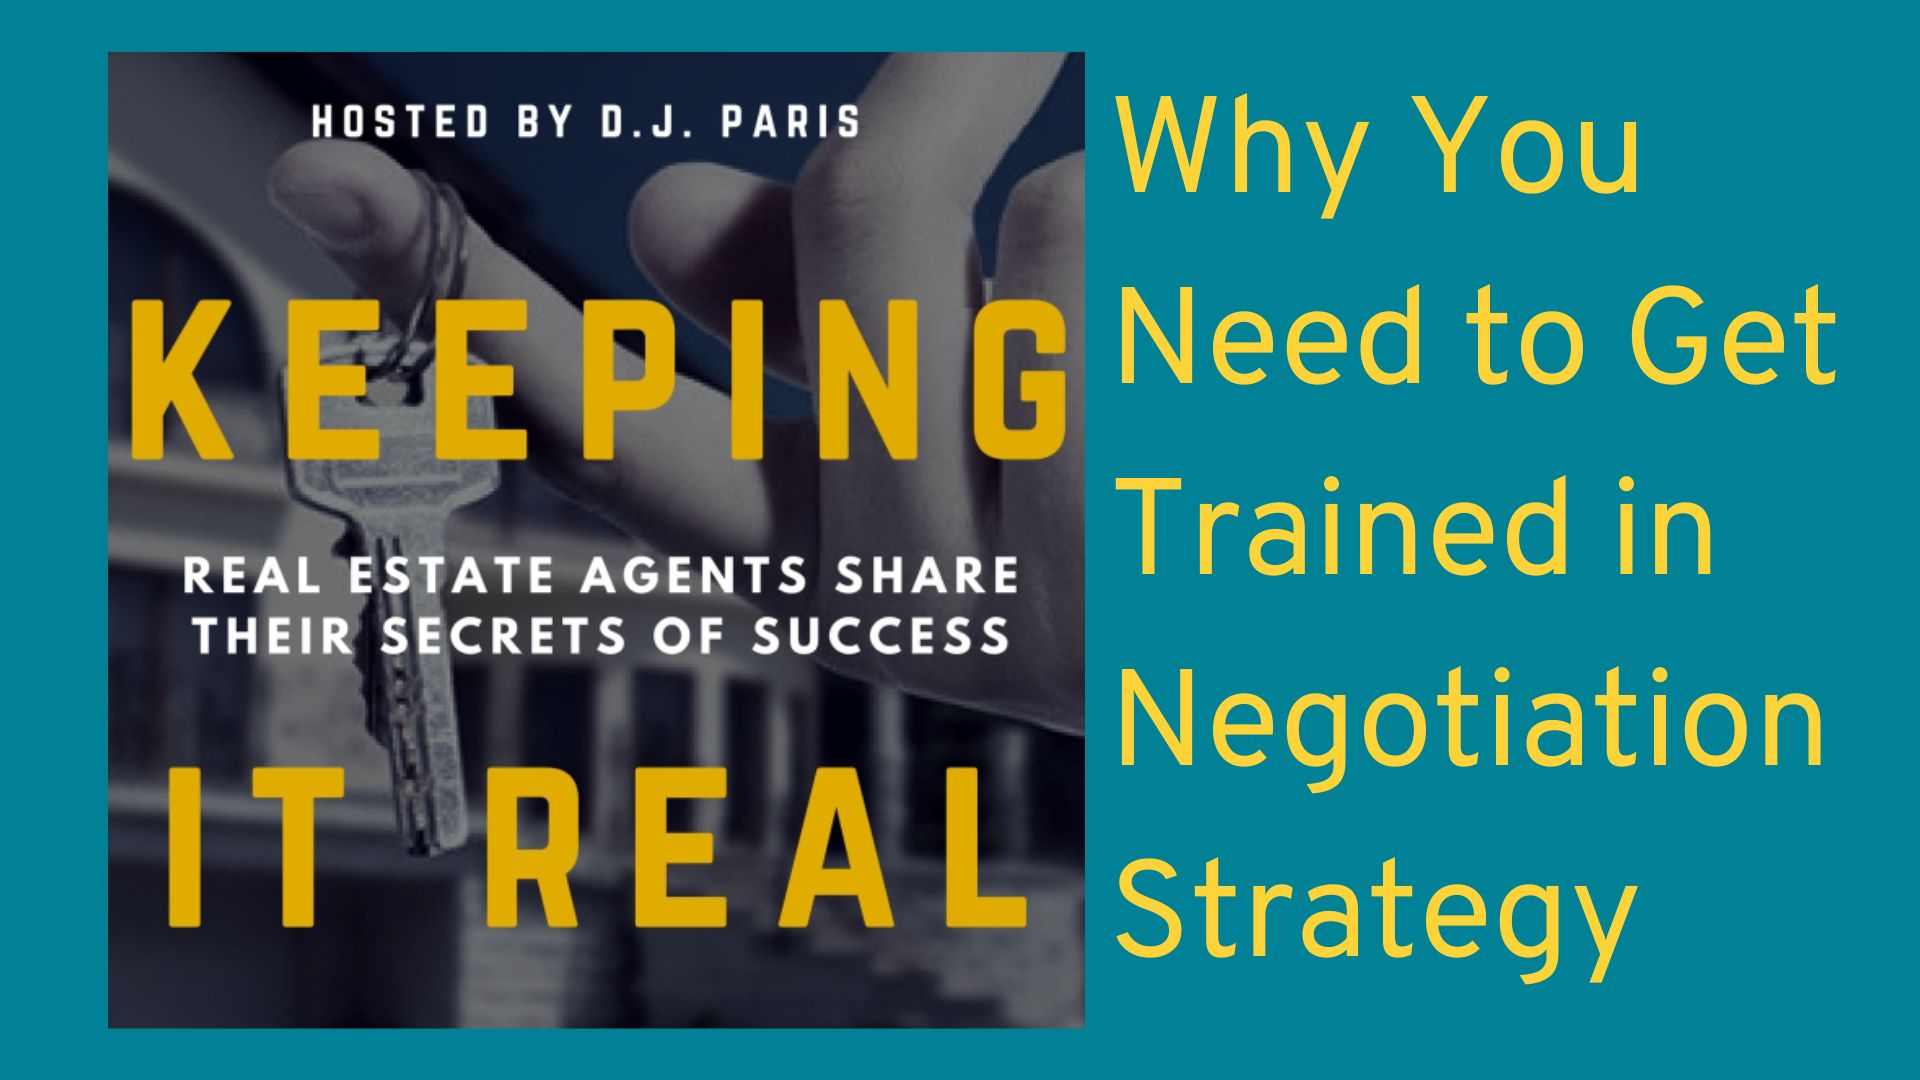 Why You Need to Get Trained in Negotiation Strategy